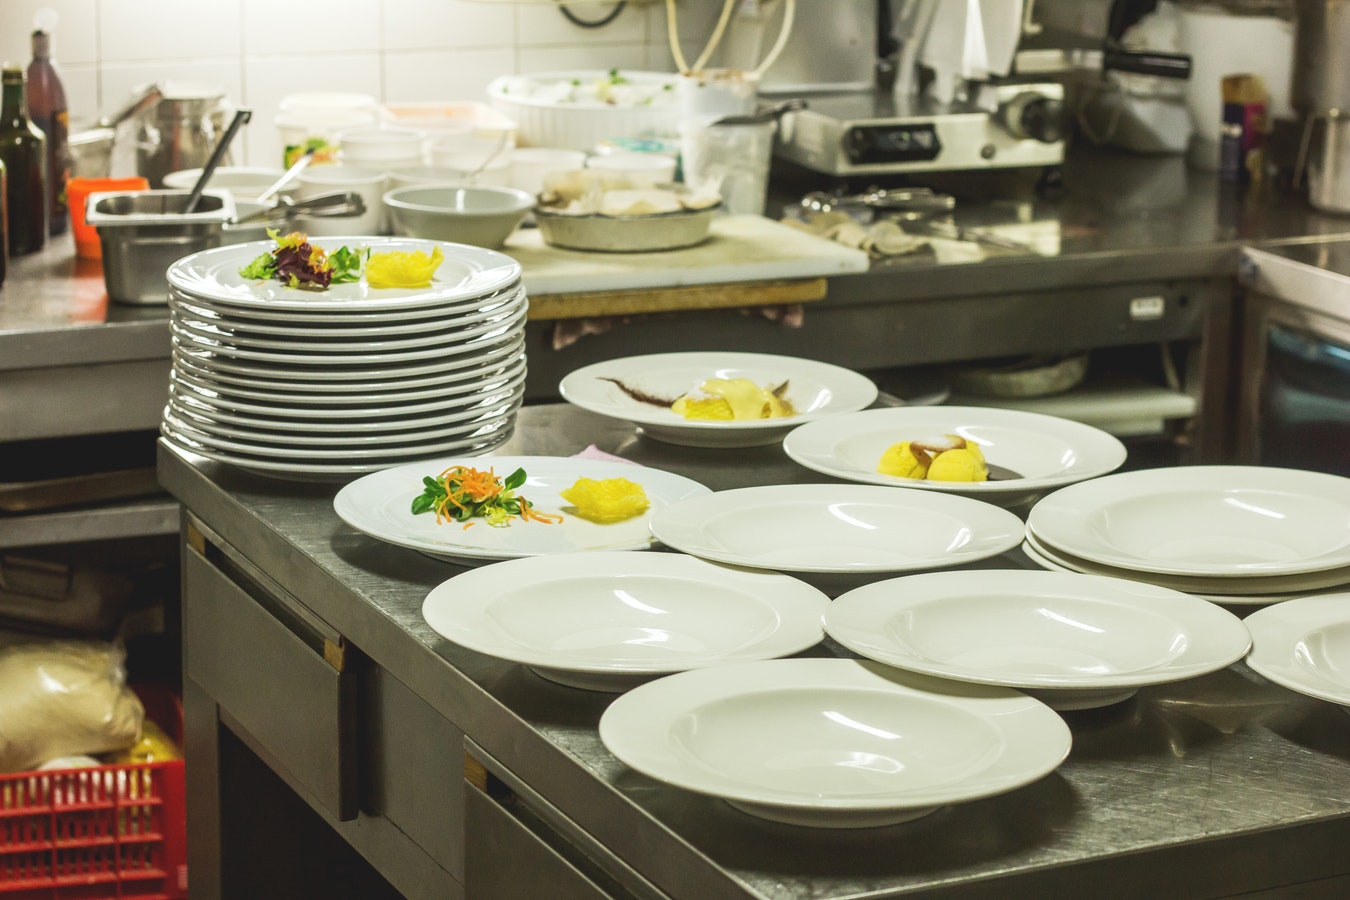 Plates In Commercial Kitchen 